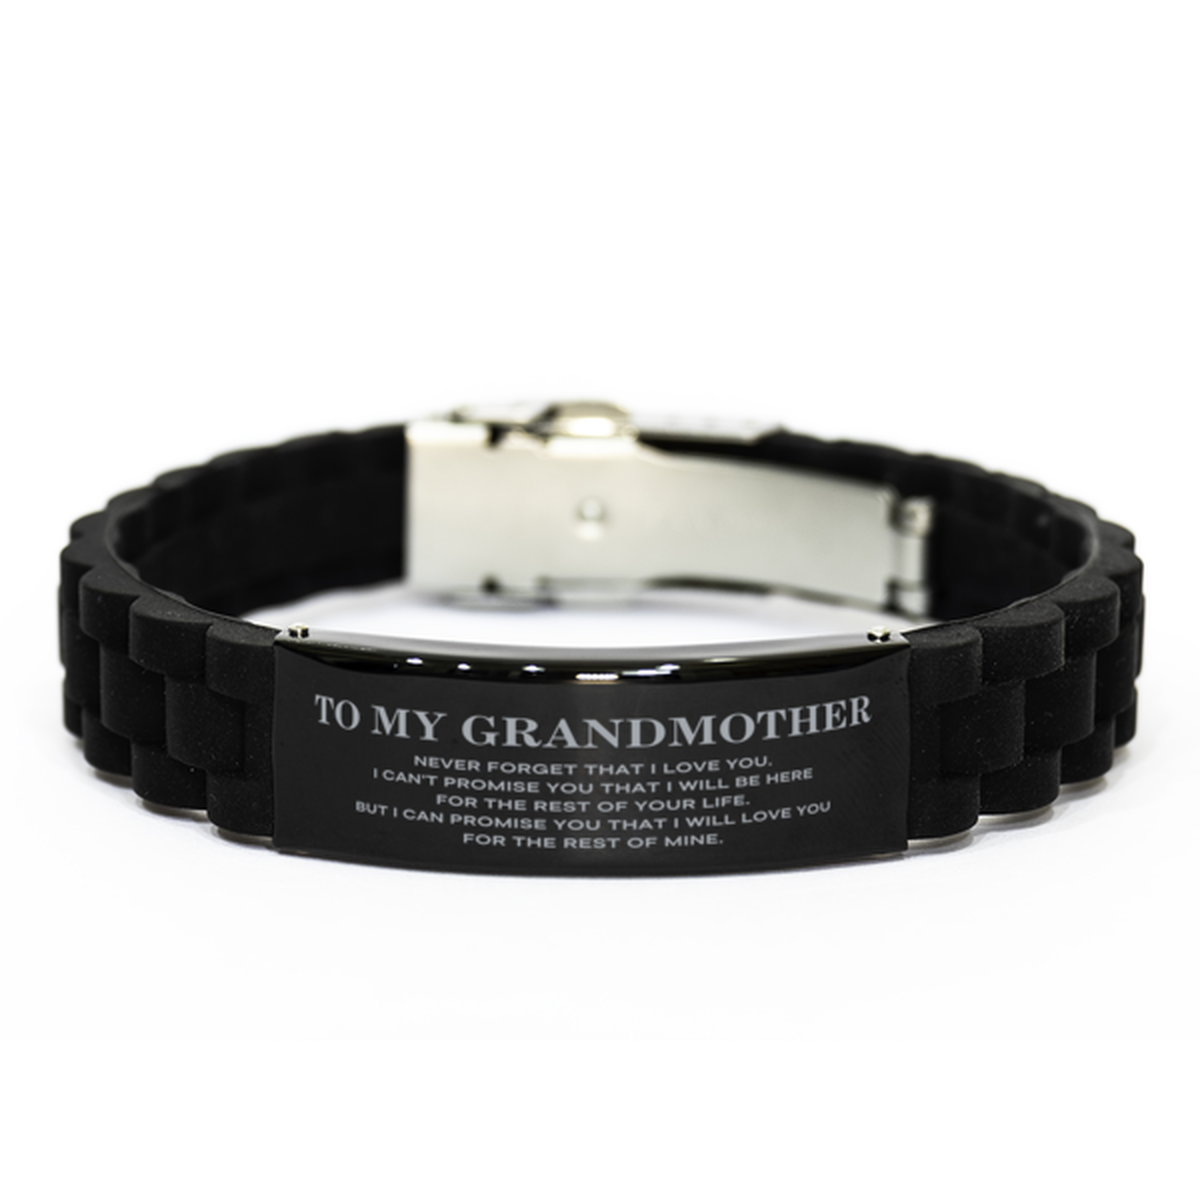 To My Grandmother Gifts, I will love you for the rest of mine, Love Grandmother Bracelet, Birthday Christmas Unique Black Glidelock Clasp Bracelet For Grandmother